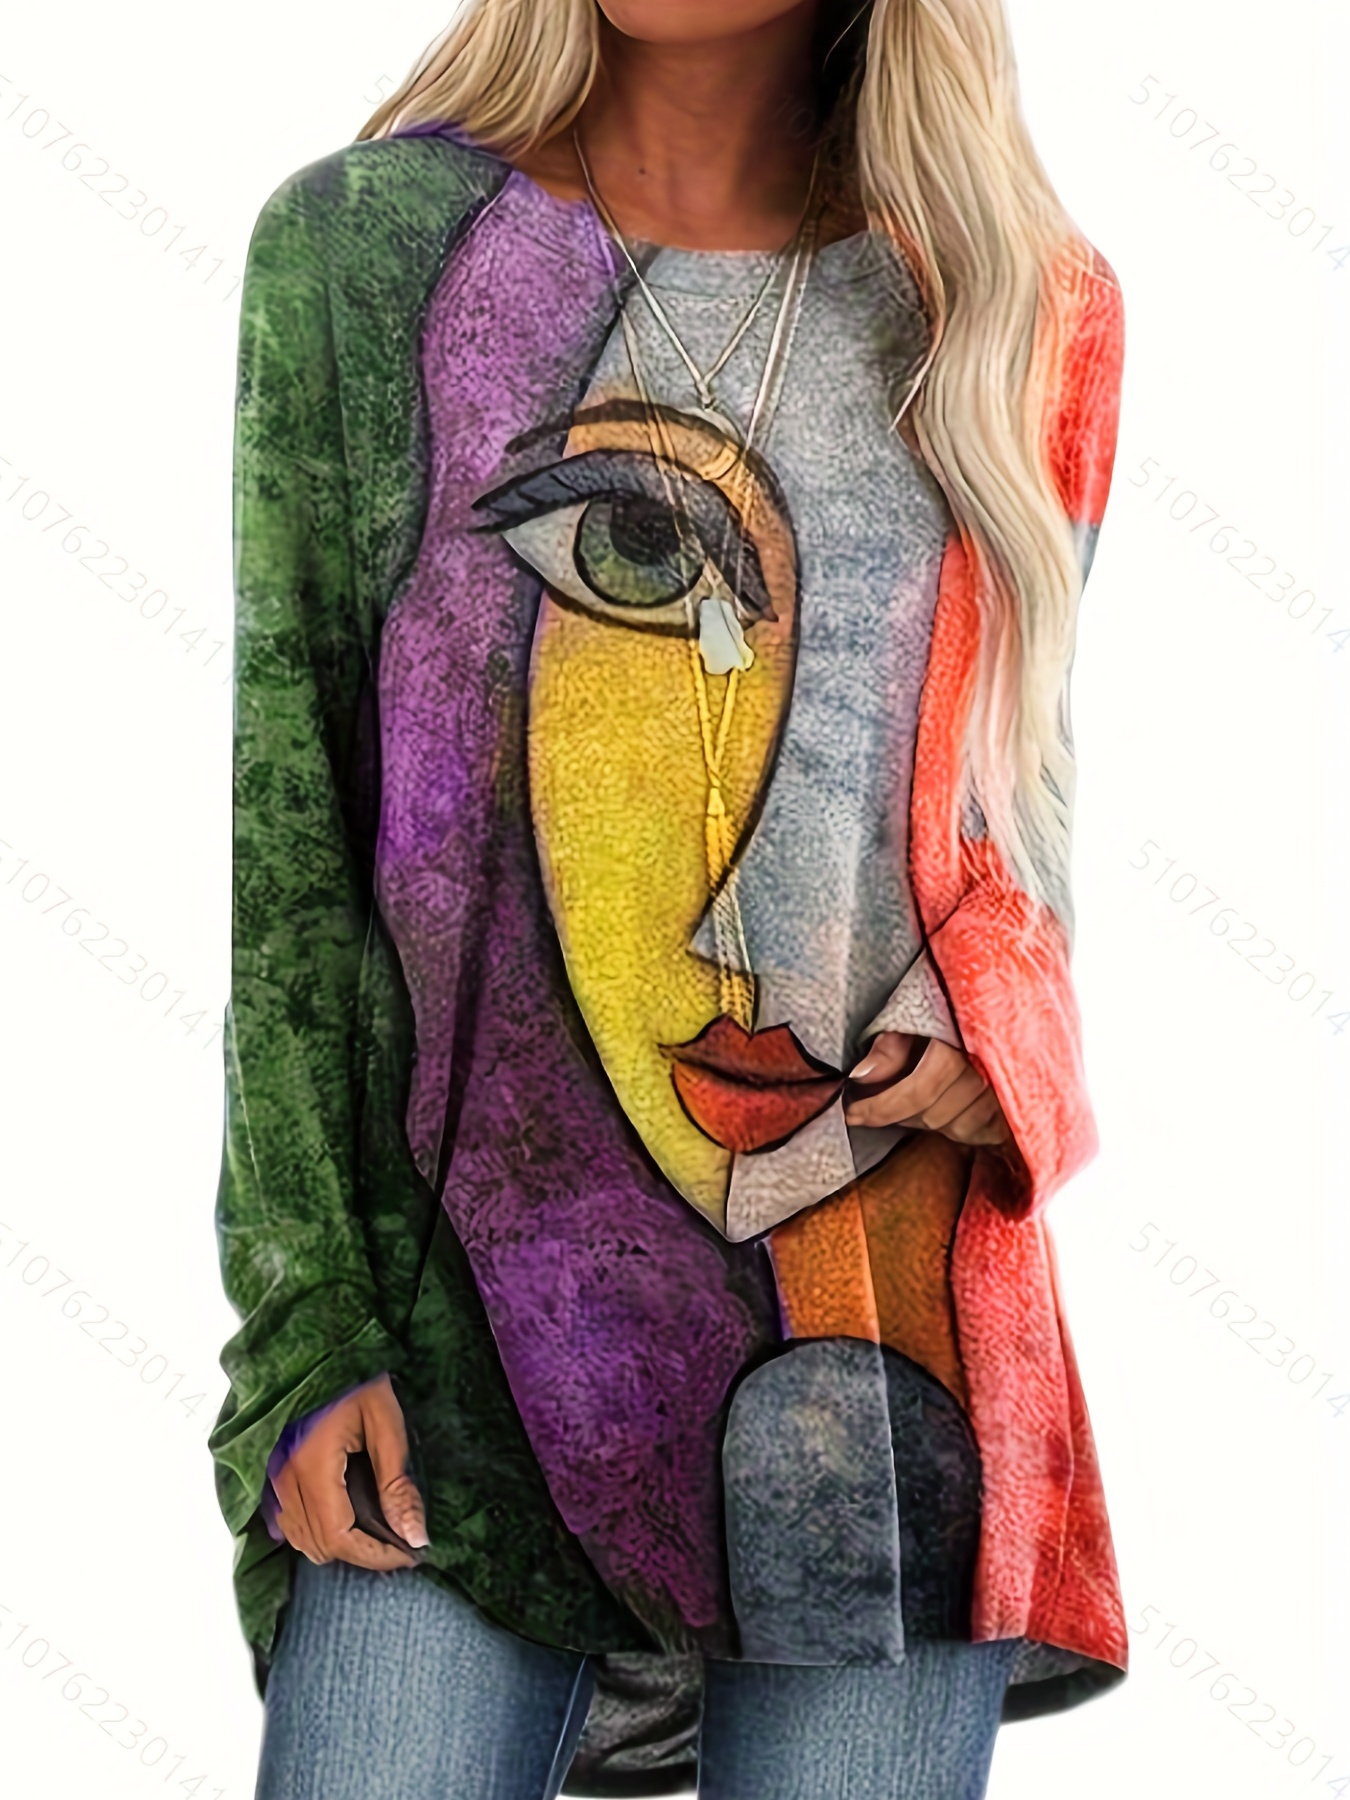 Fesfesfes Fashion Tops Sweatshirt for Women O-Neck Long Sleeve T-Shirt Fall  Printing Blouse Tops Clearance Under $10